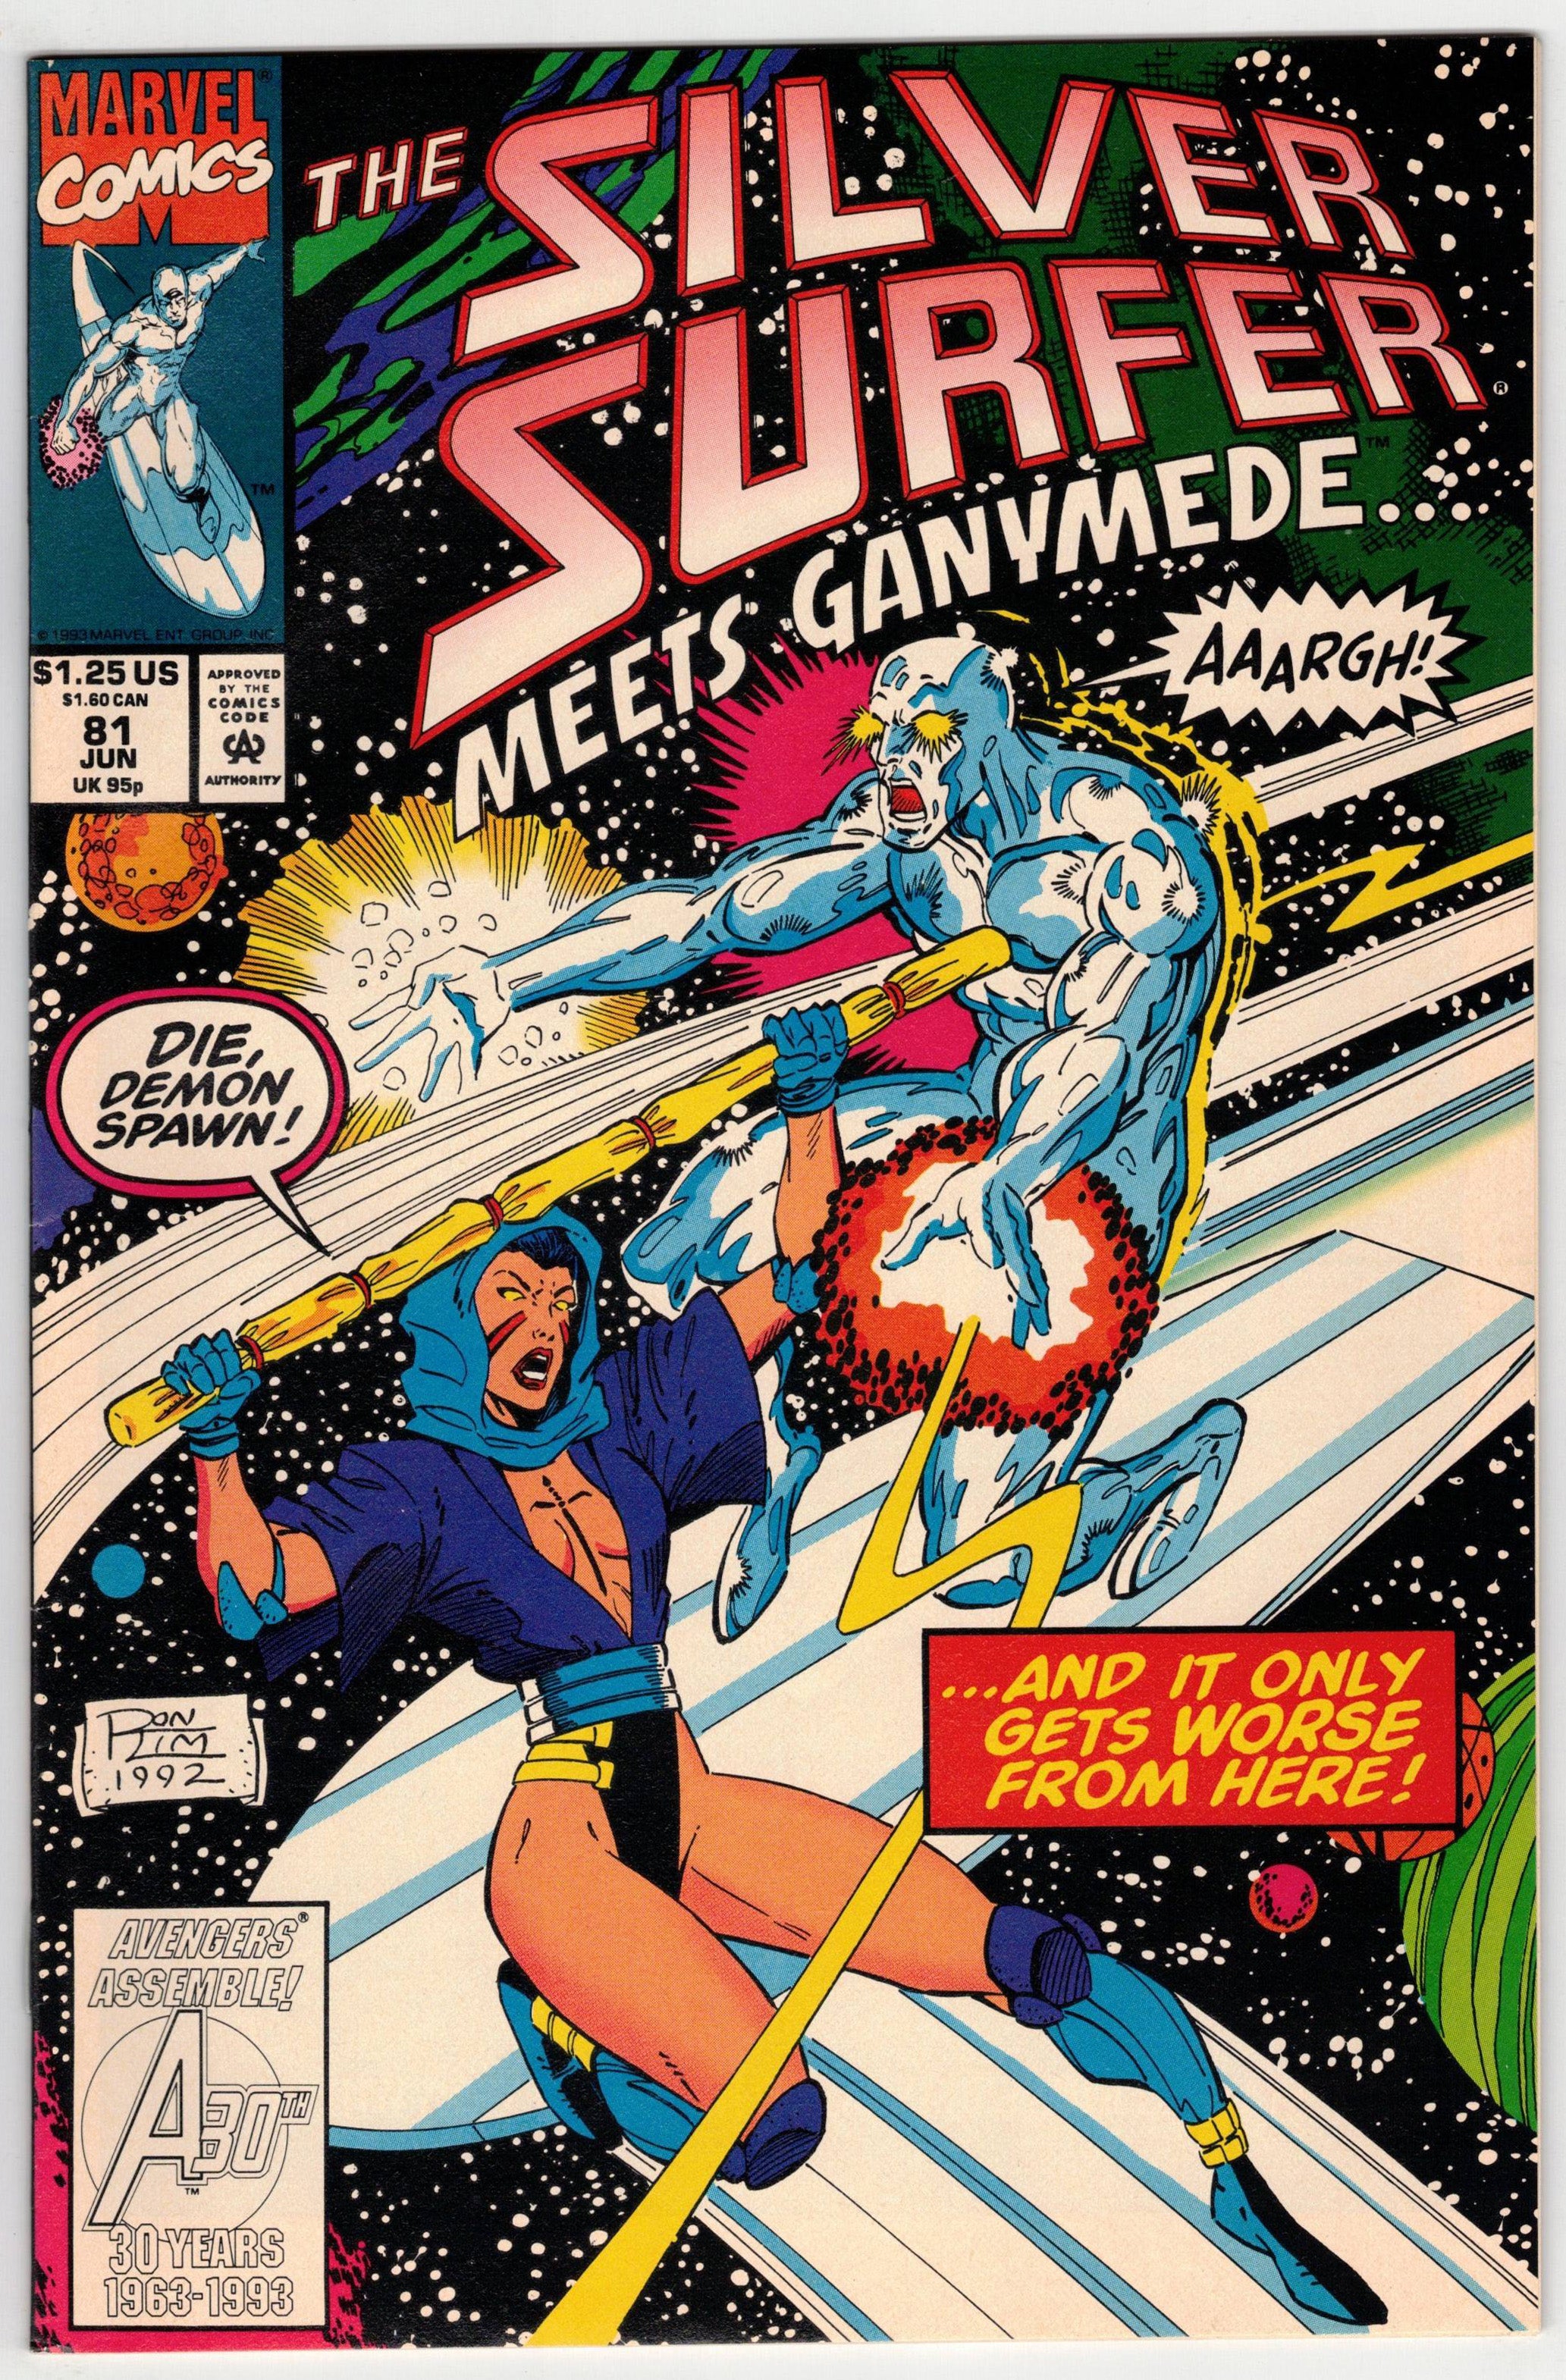 Photo of Silver Surfer, Vol. 3 (1993) Issue 81 - Near Mint - Comic sold by Stronghold Collectibles